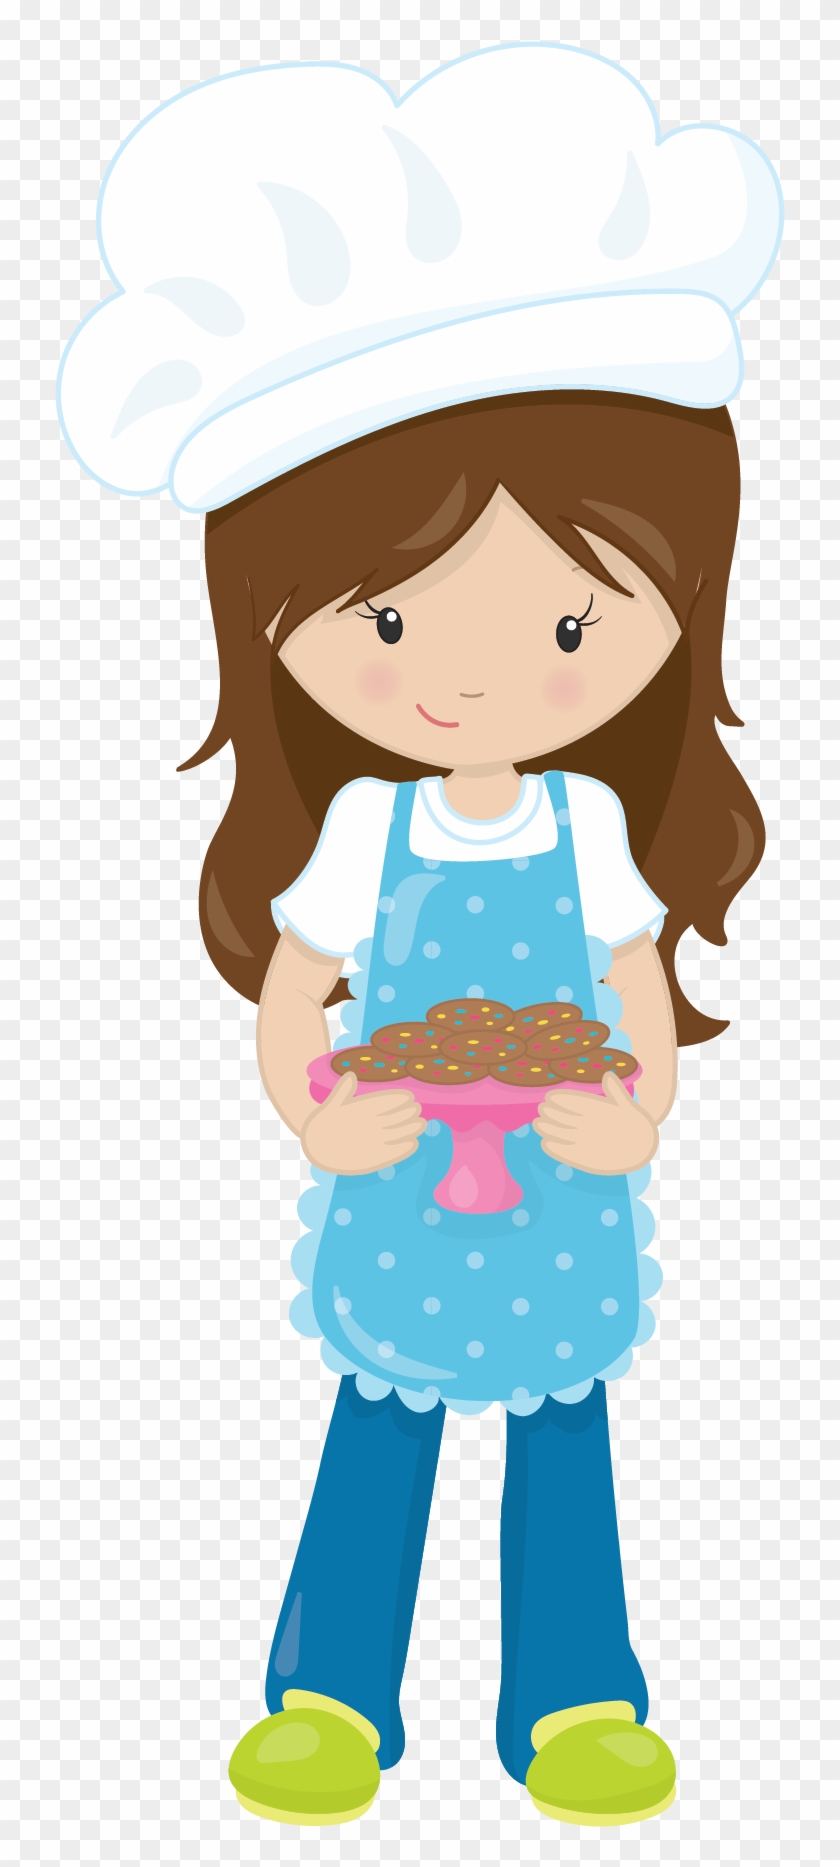 Girl Bakers-23 - Internet Coupon #868412